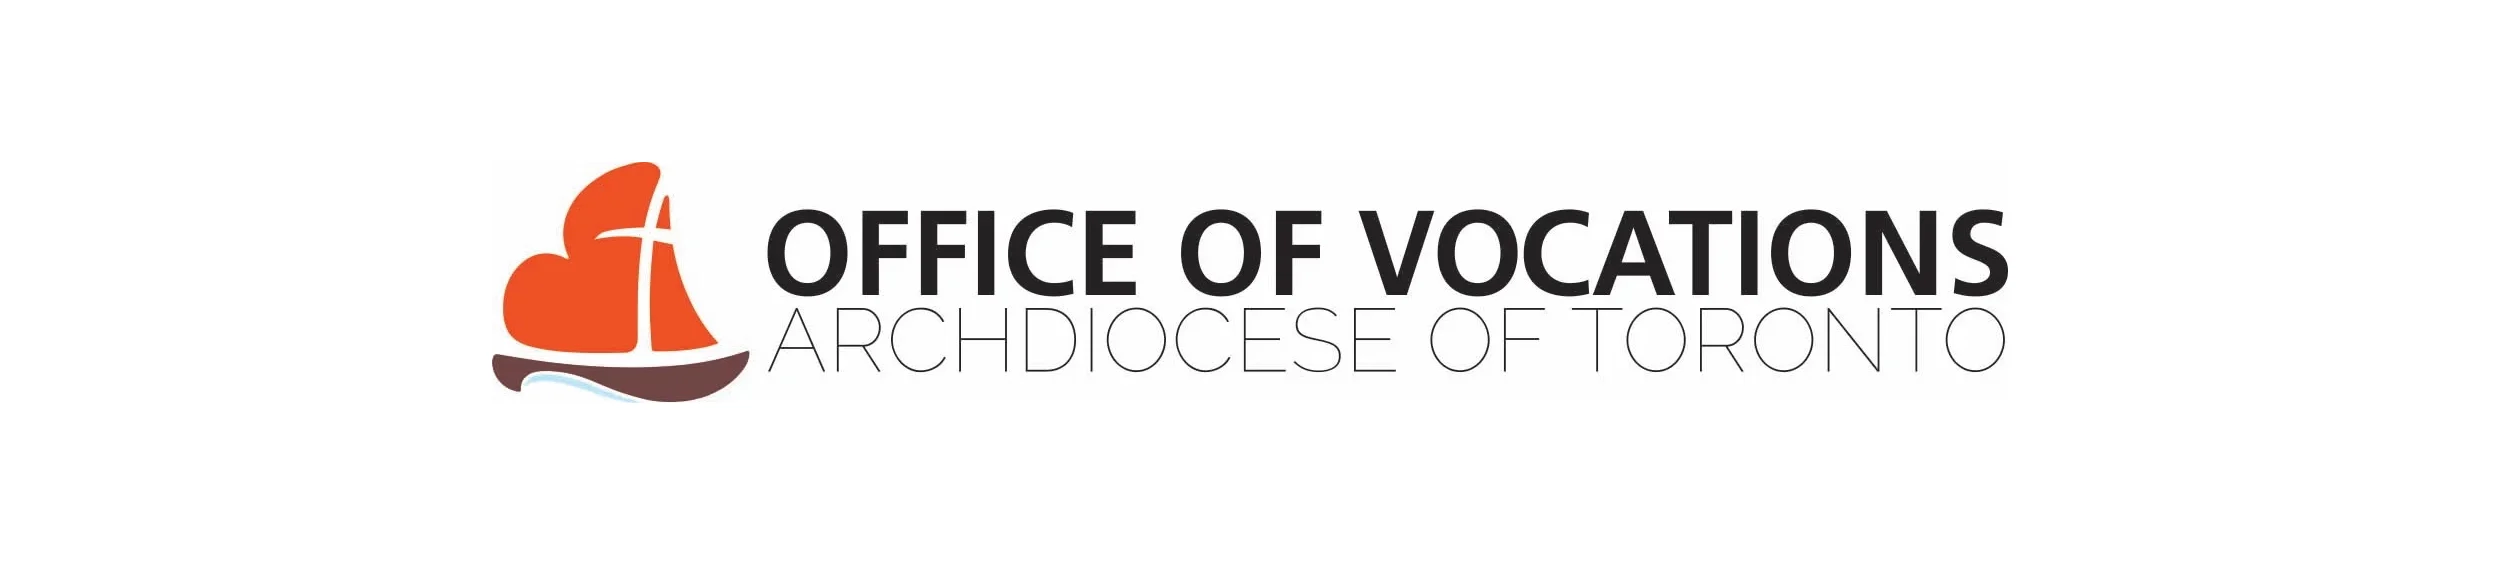 PRAY FOR VOCATIONS